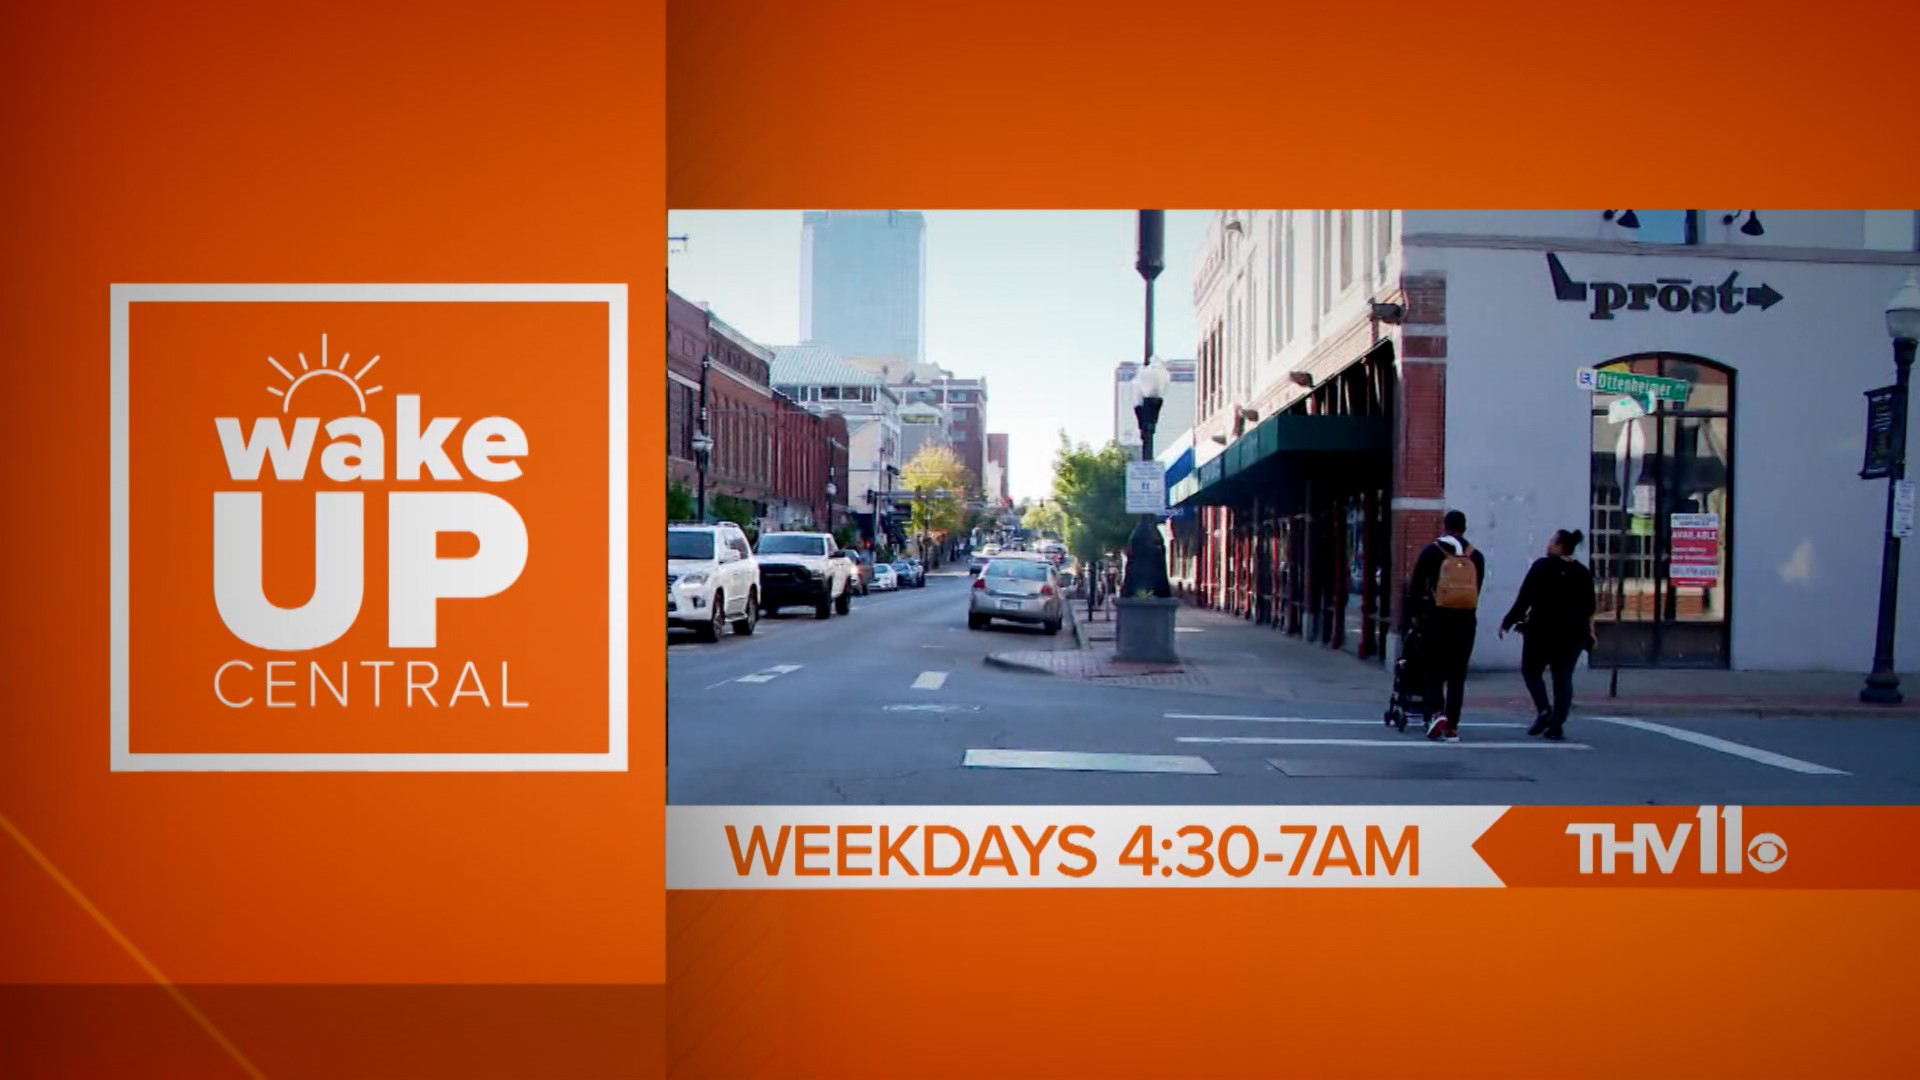 Wake Up Central checks all the boxes when it comes news, weather, and more!